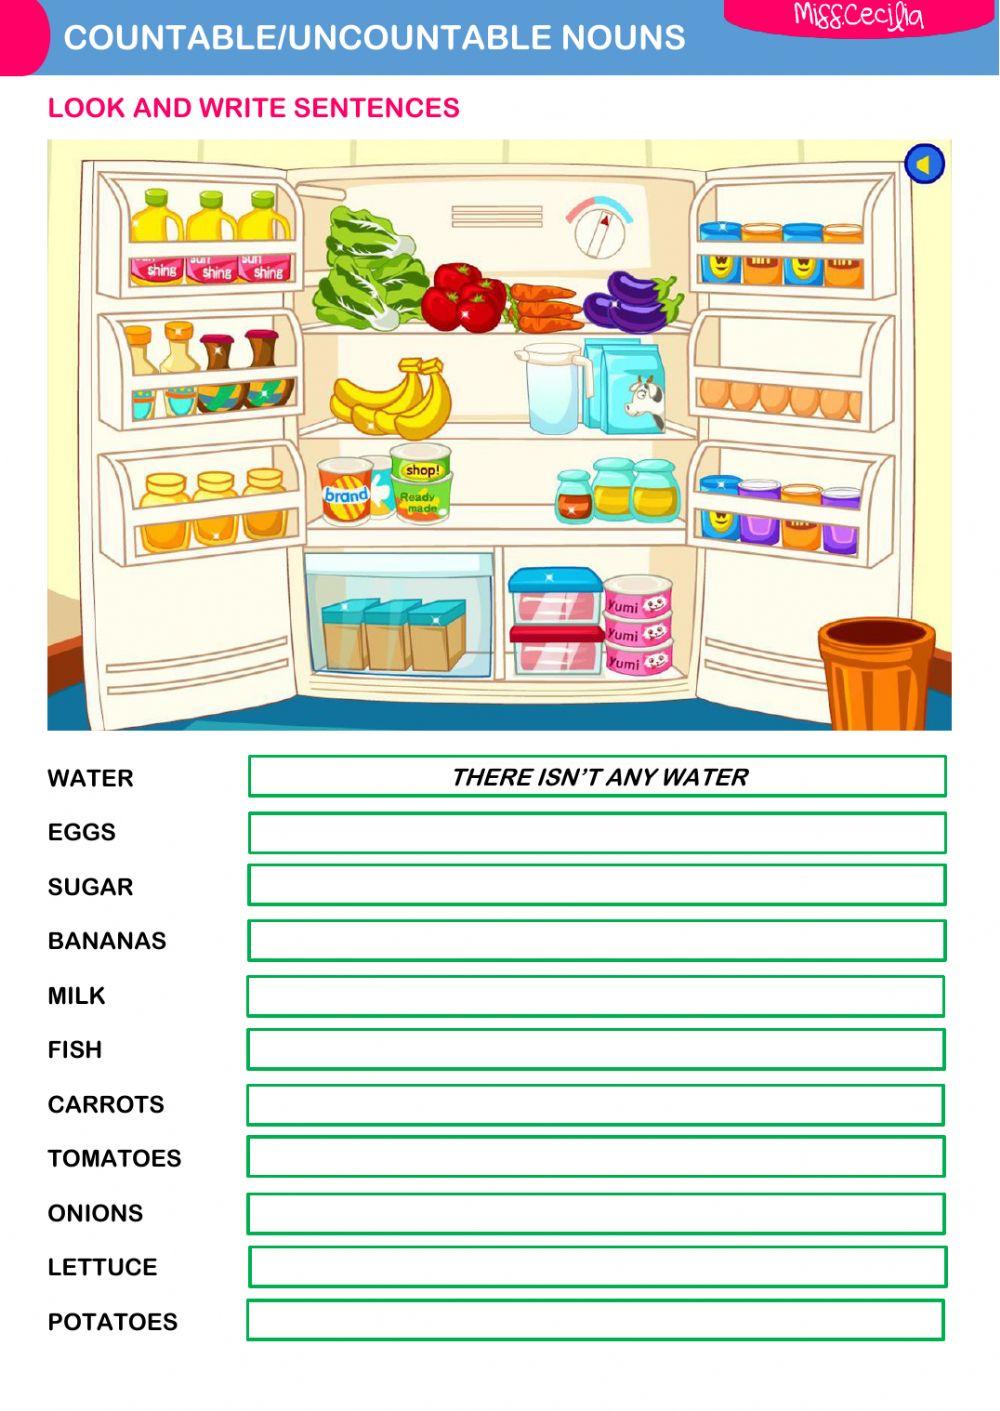 Some any worksheet for kids. Countable and uncountable. Английский countable and uncountable Nouns. Some any Worksheets продукты. Countable and uncountable Nouns задания.